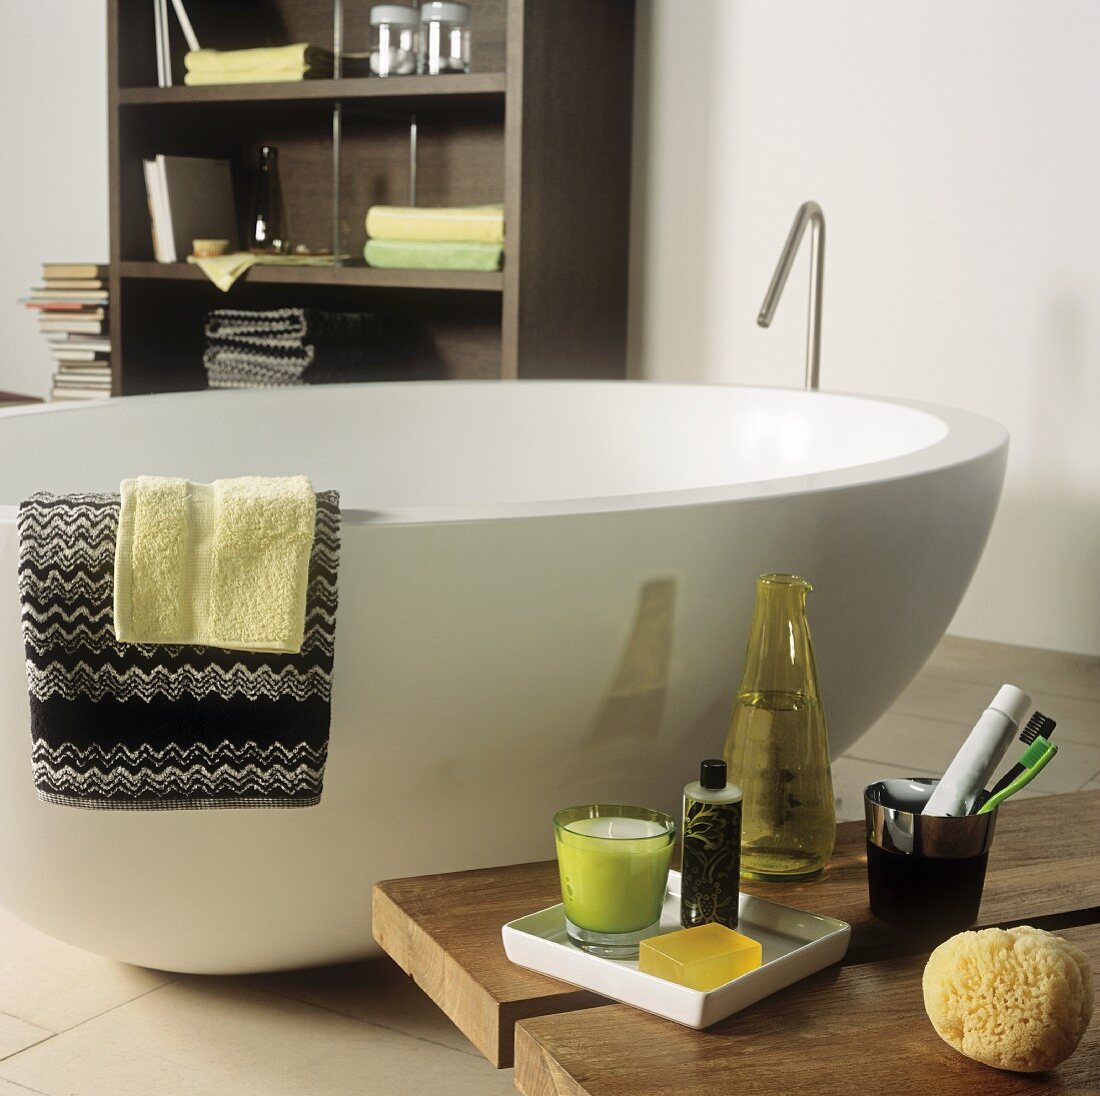 An oval shaped free standing bathtub and bath accessories